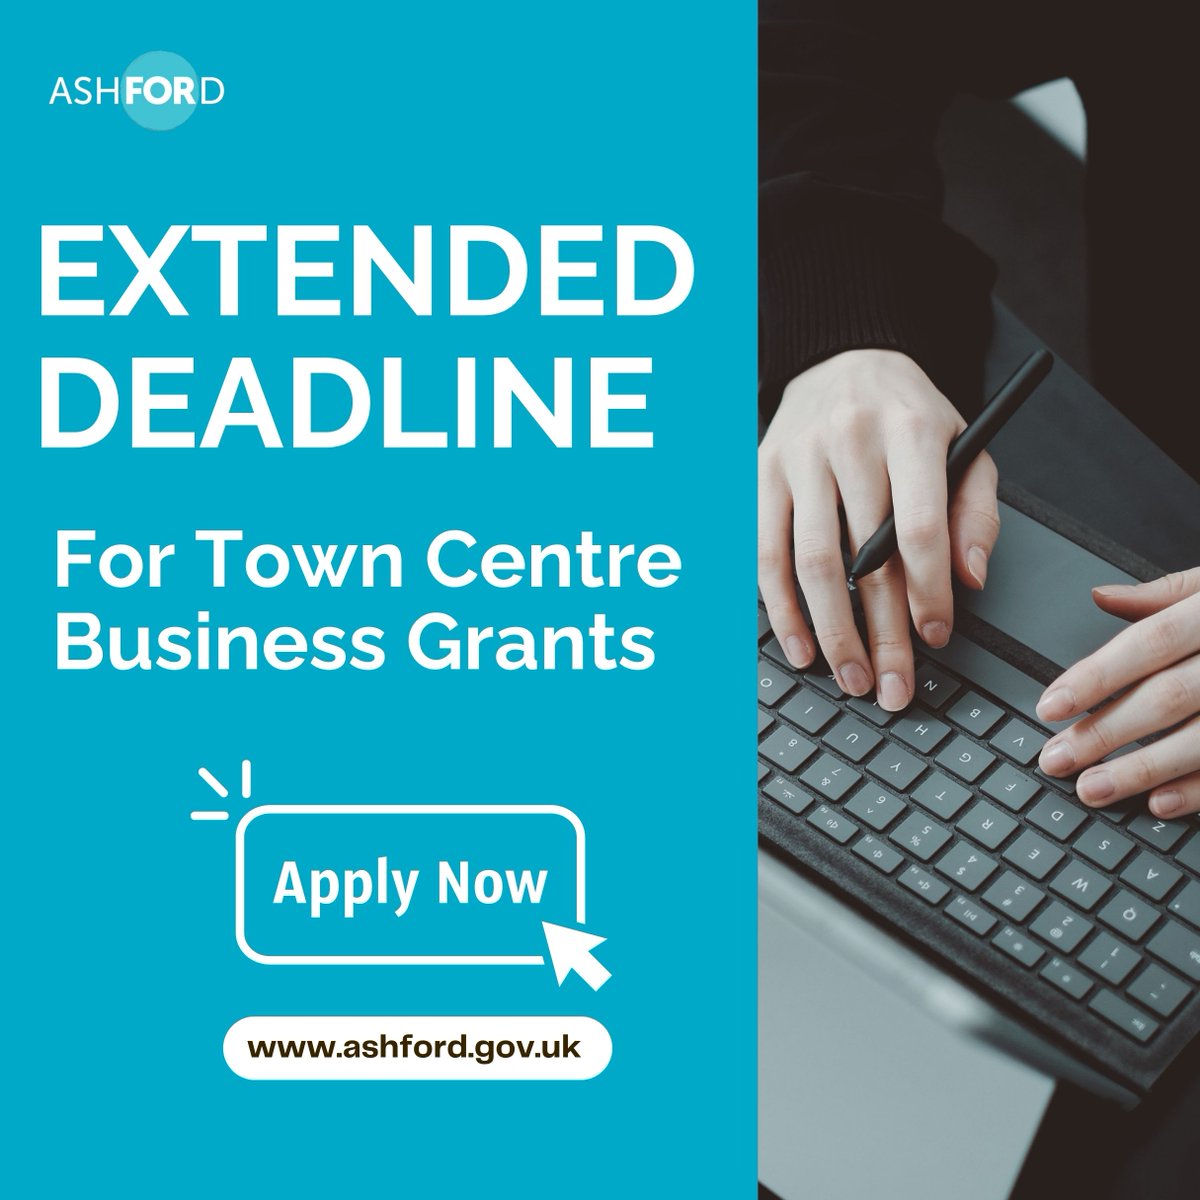 📢 UPDATE 📢 Town Centre Business Grants deadline extended ⏬ ⏬ ⏬ You now have until 23:59 on 31st May 2024 to submit your application. orlo.uk/RK0zn #BusinessLoan #loans #Kent #Ashford #Governmentfunding #BusinessSupport #TownCentre #TownCentreGrants